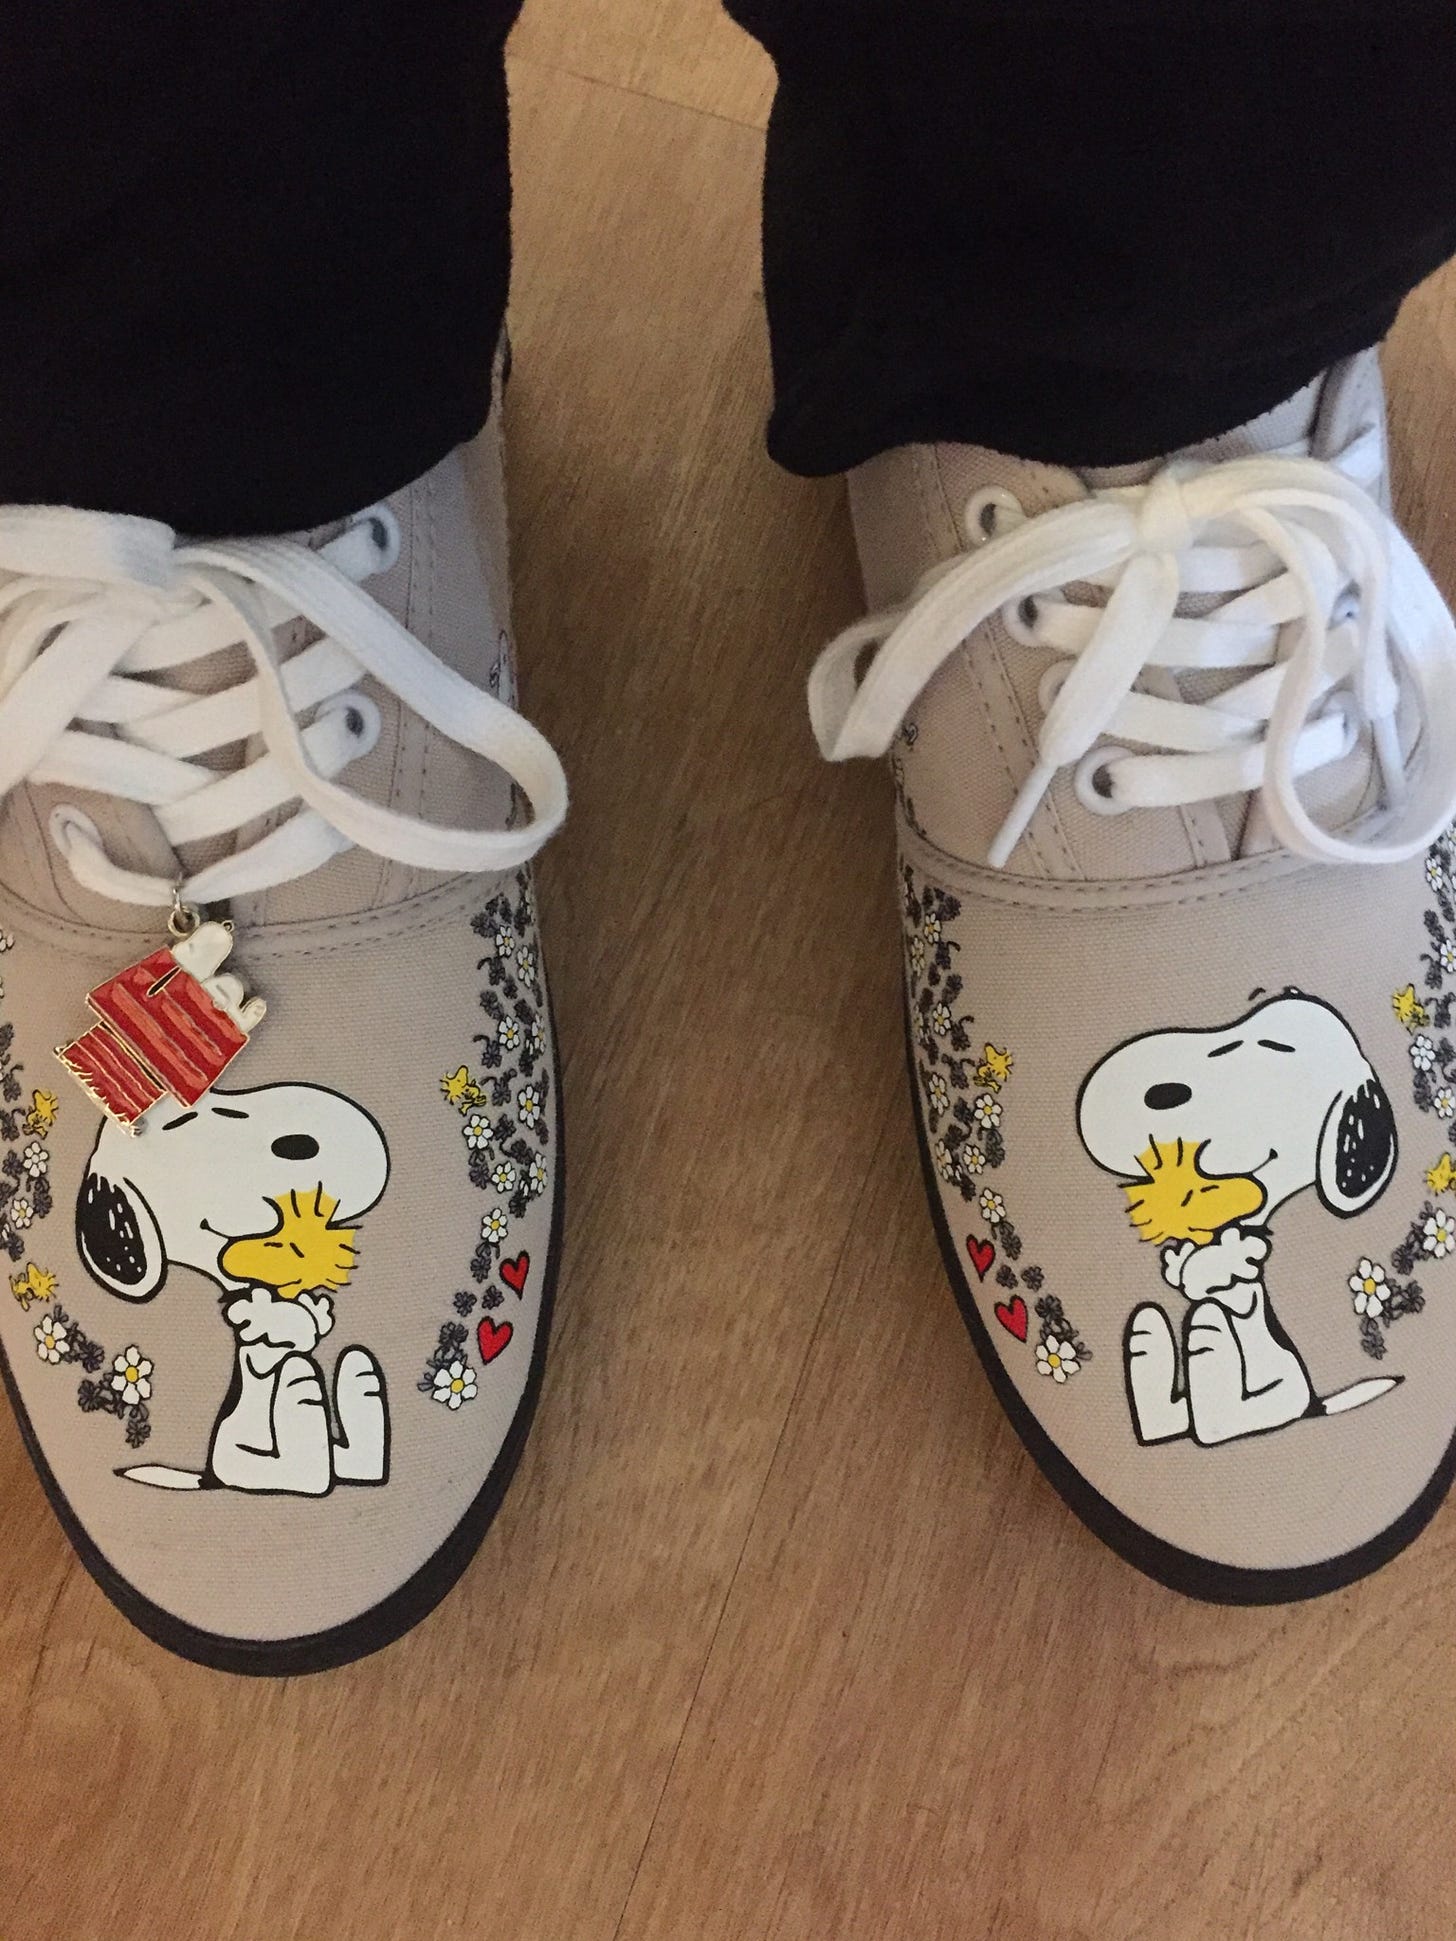 tan tennis shoes with a picture of Snoopy hugging Woodstock on them